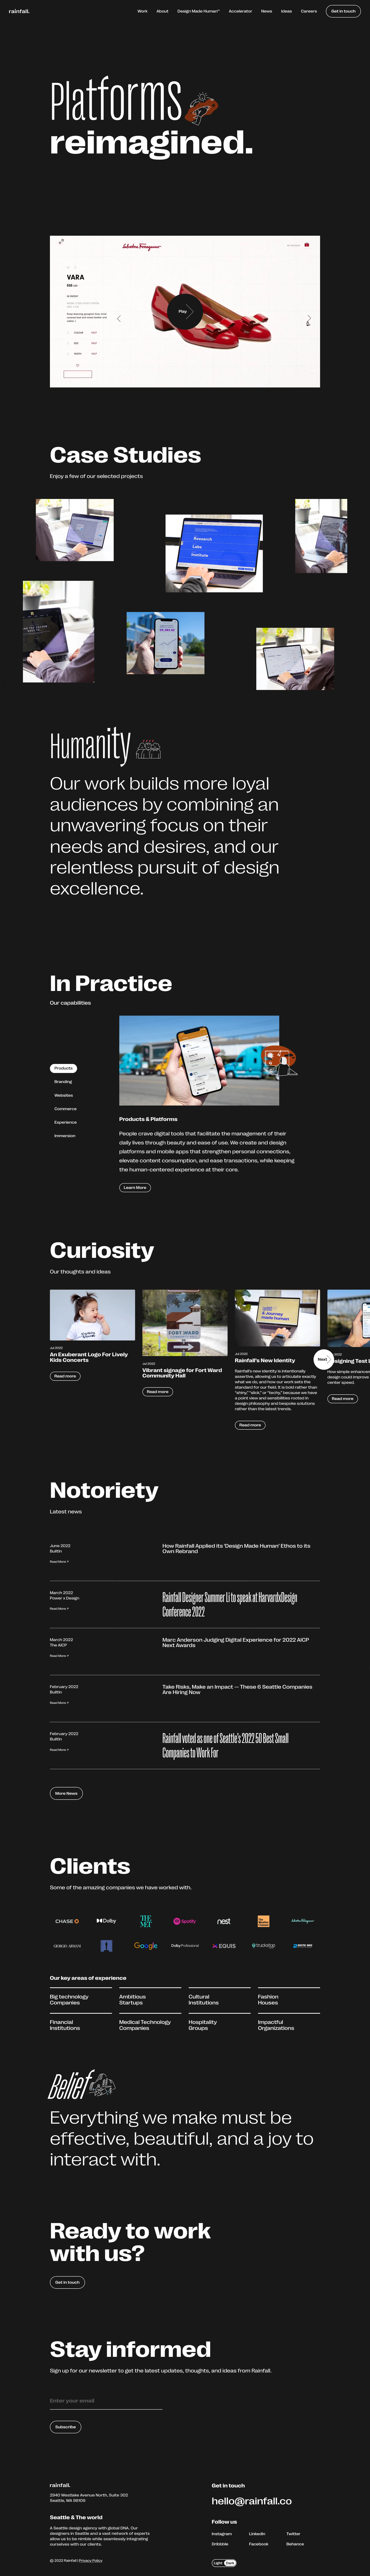 Rainfall Landing Page Example: Rainfall is a design studio that specializes in creating rich, engaging brand experiences from brand identity to digital products, website and mobile apps, UX...